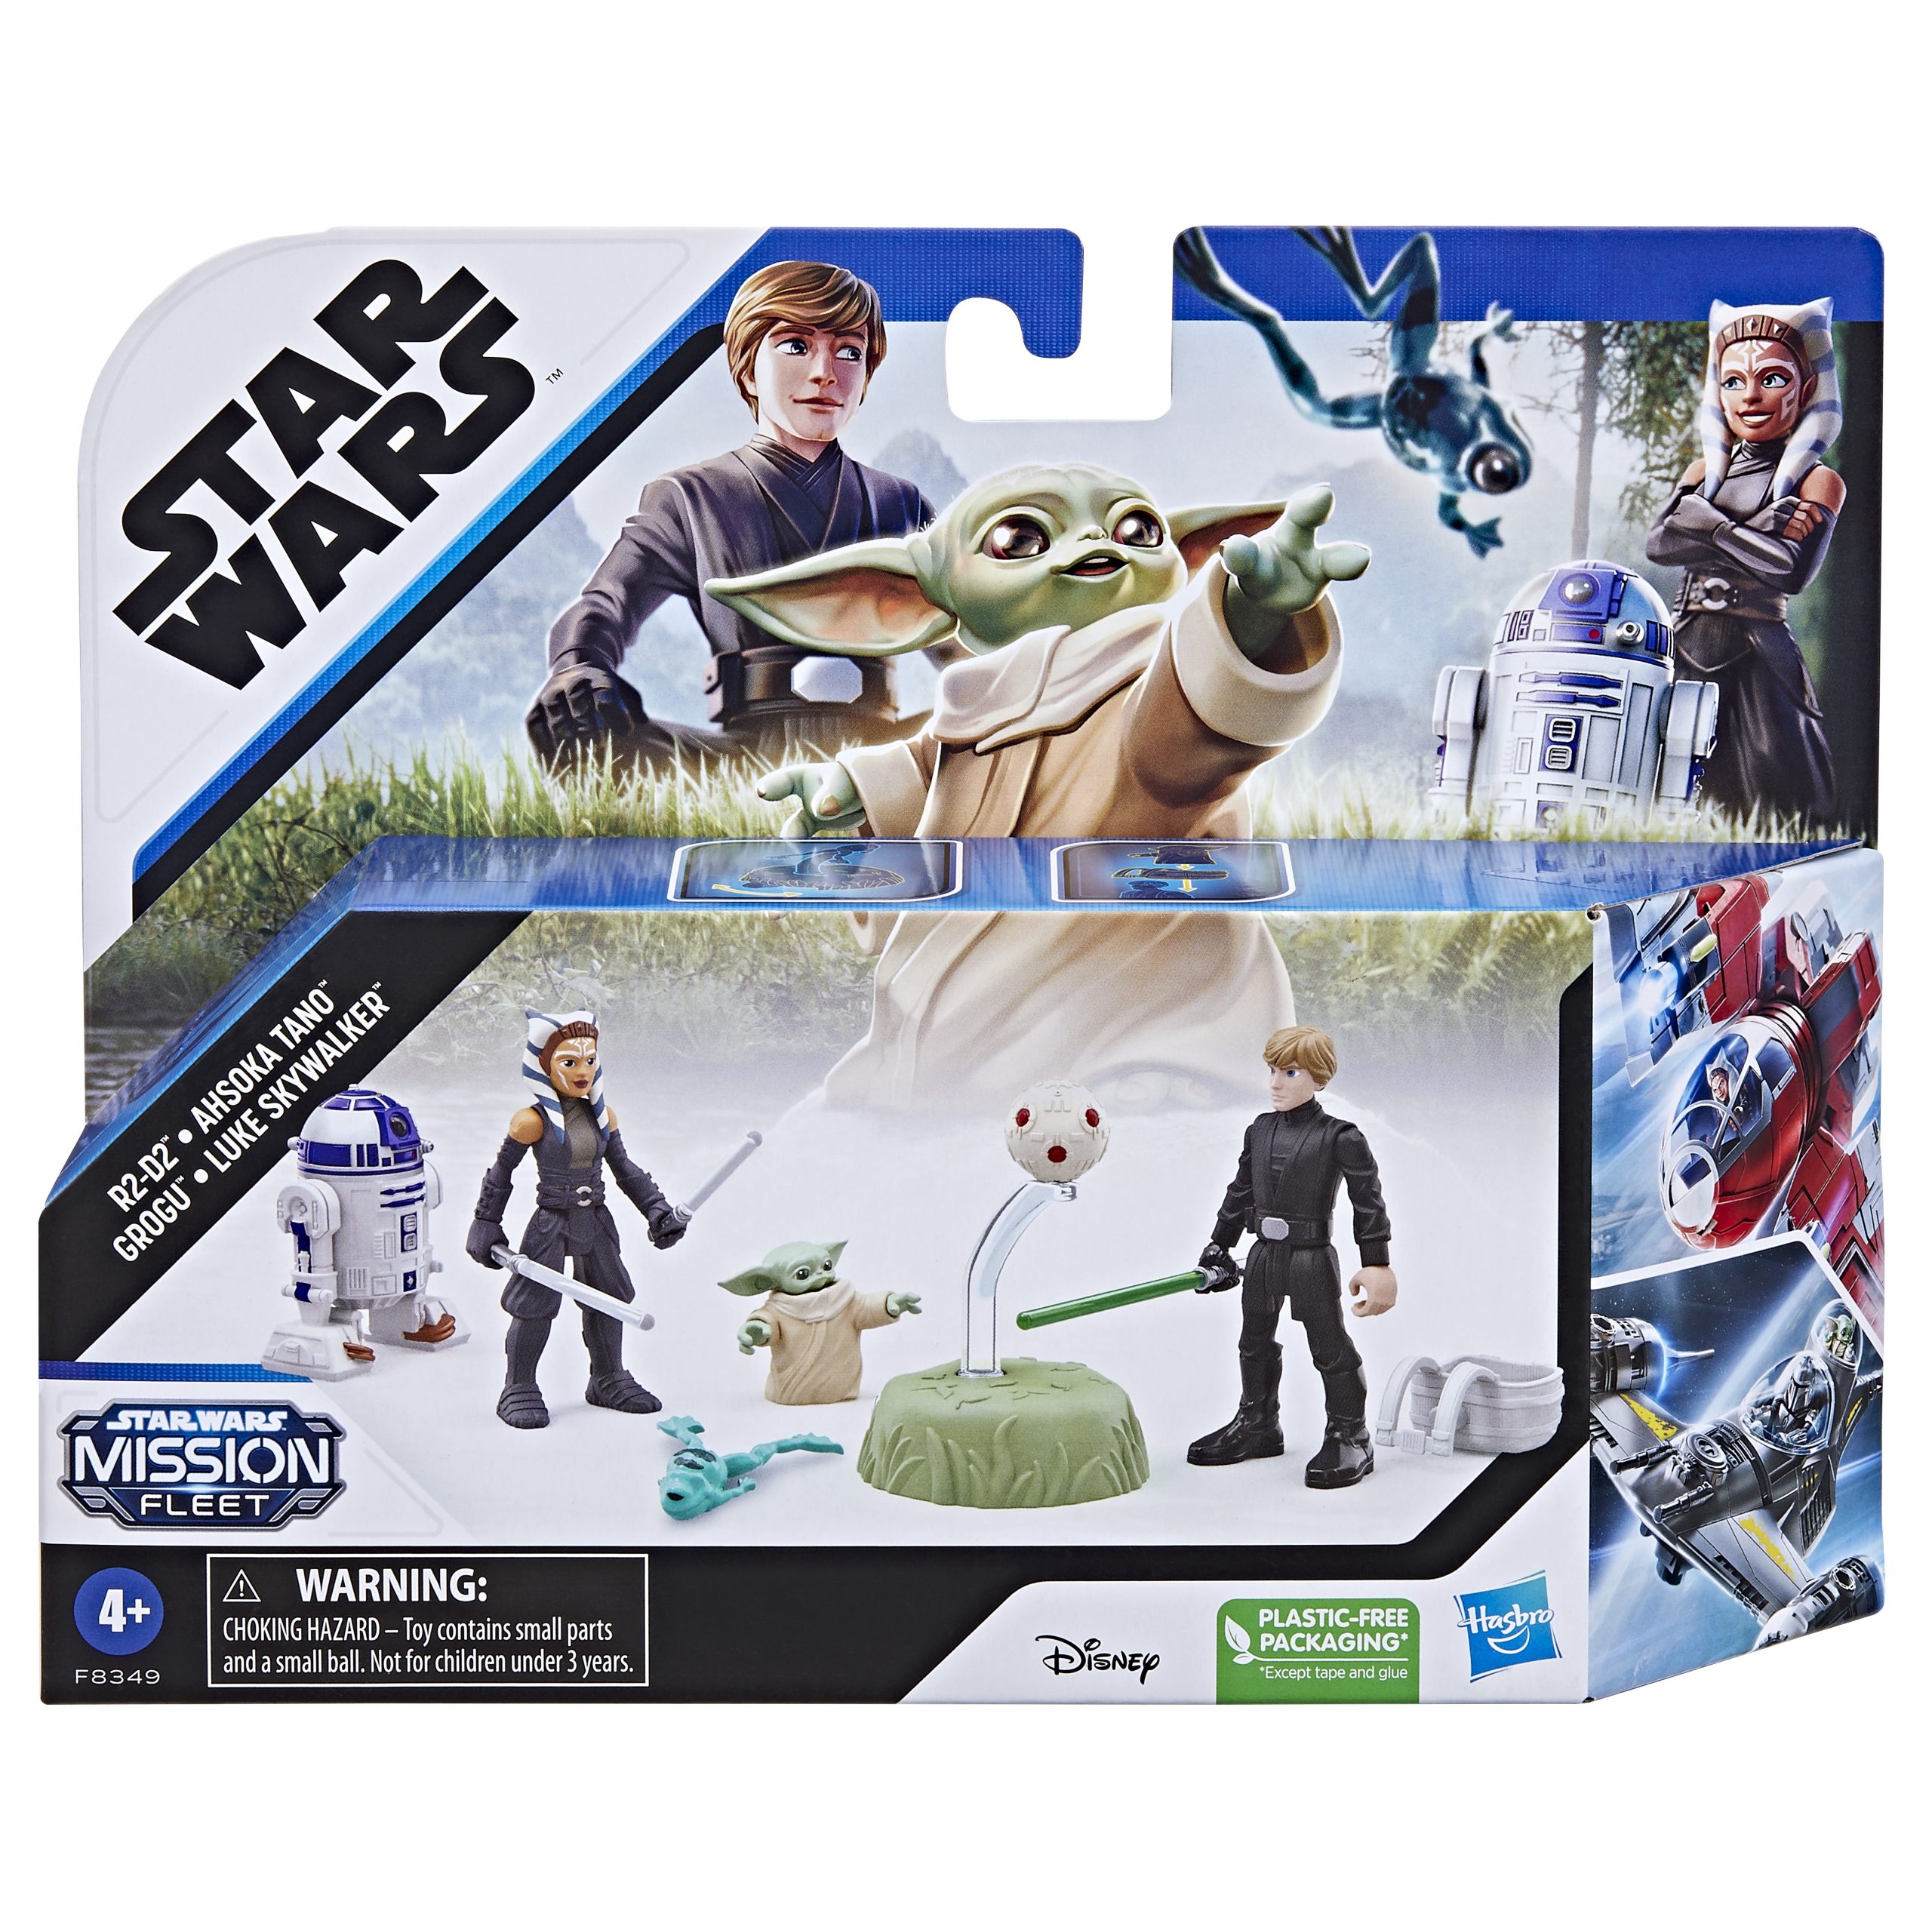 Hasbro Announces New 'Star Wars' Black Series Figures, Including